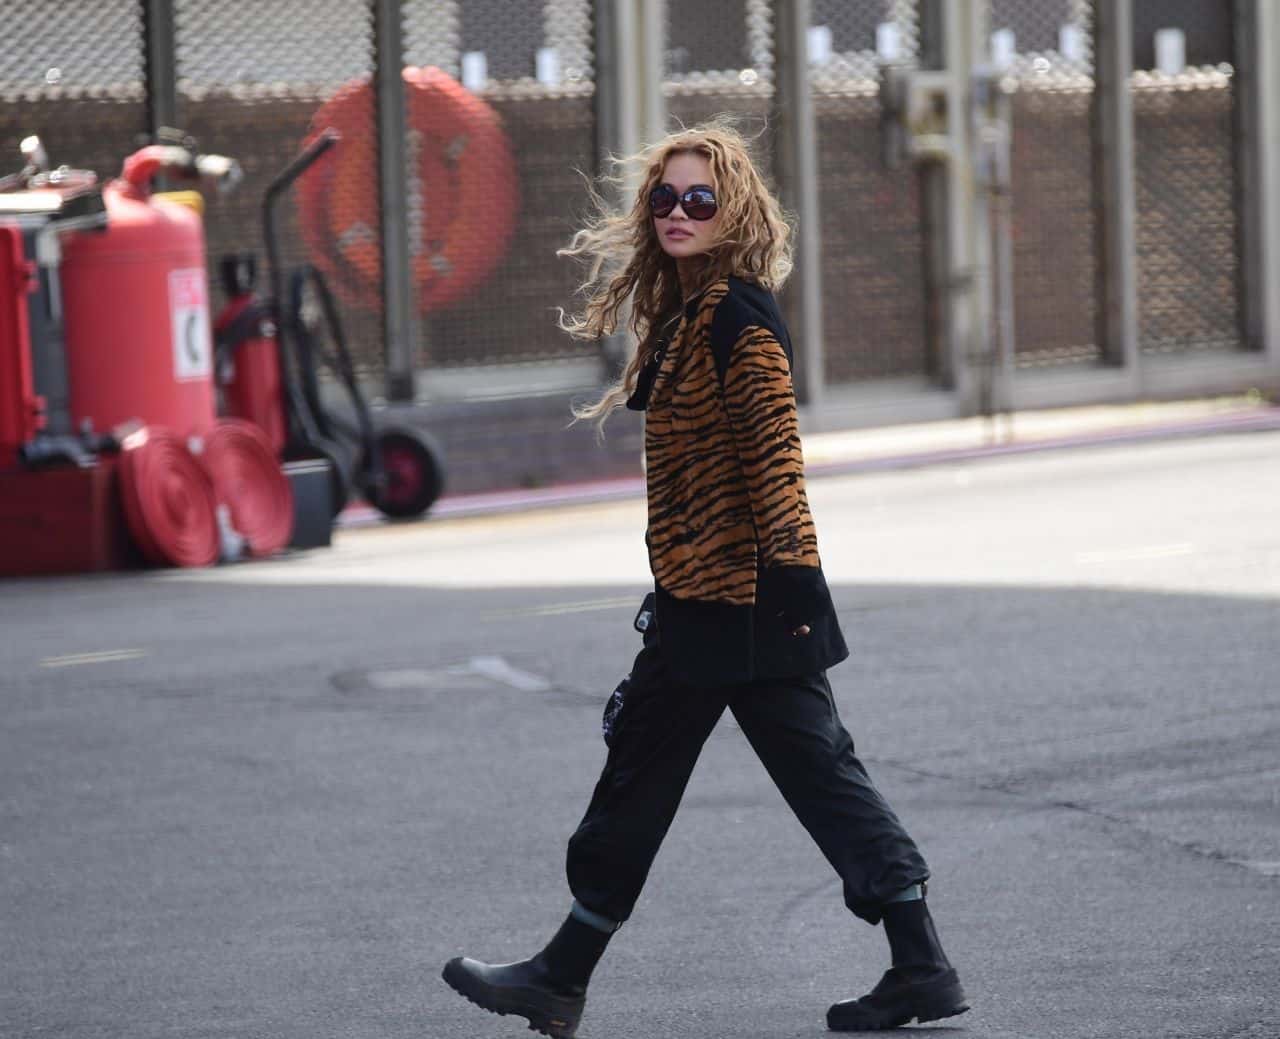 Rita Ora Looks Fiercely Chic in a Tiger Print Jacket at the London Heliport